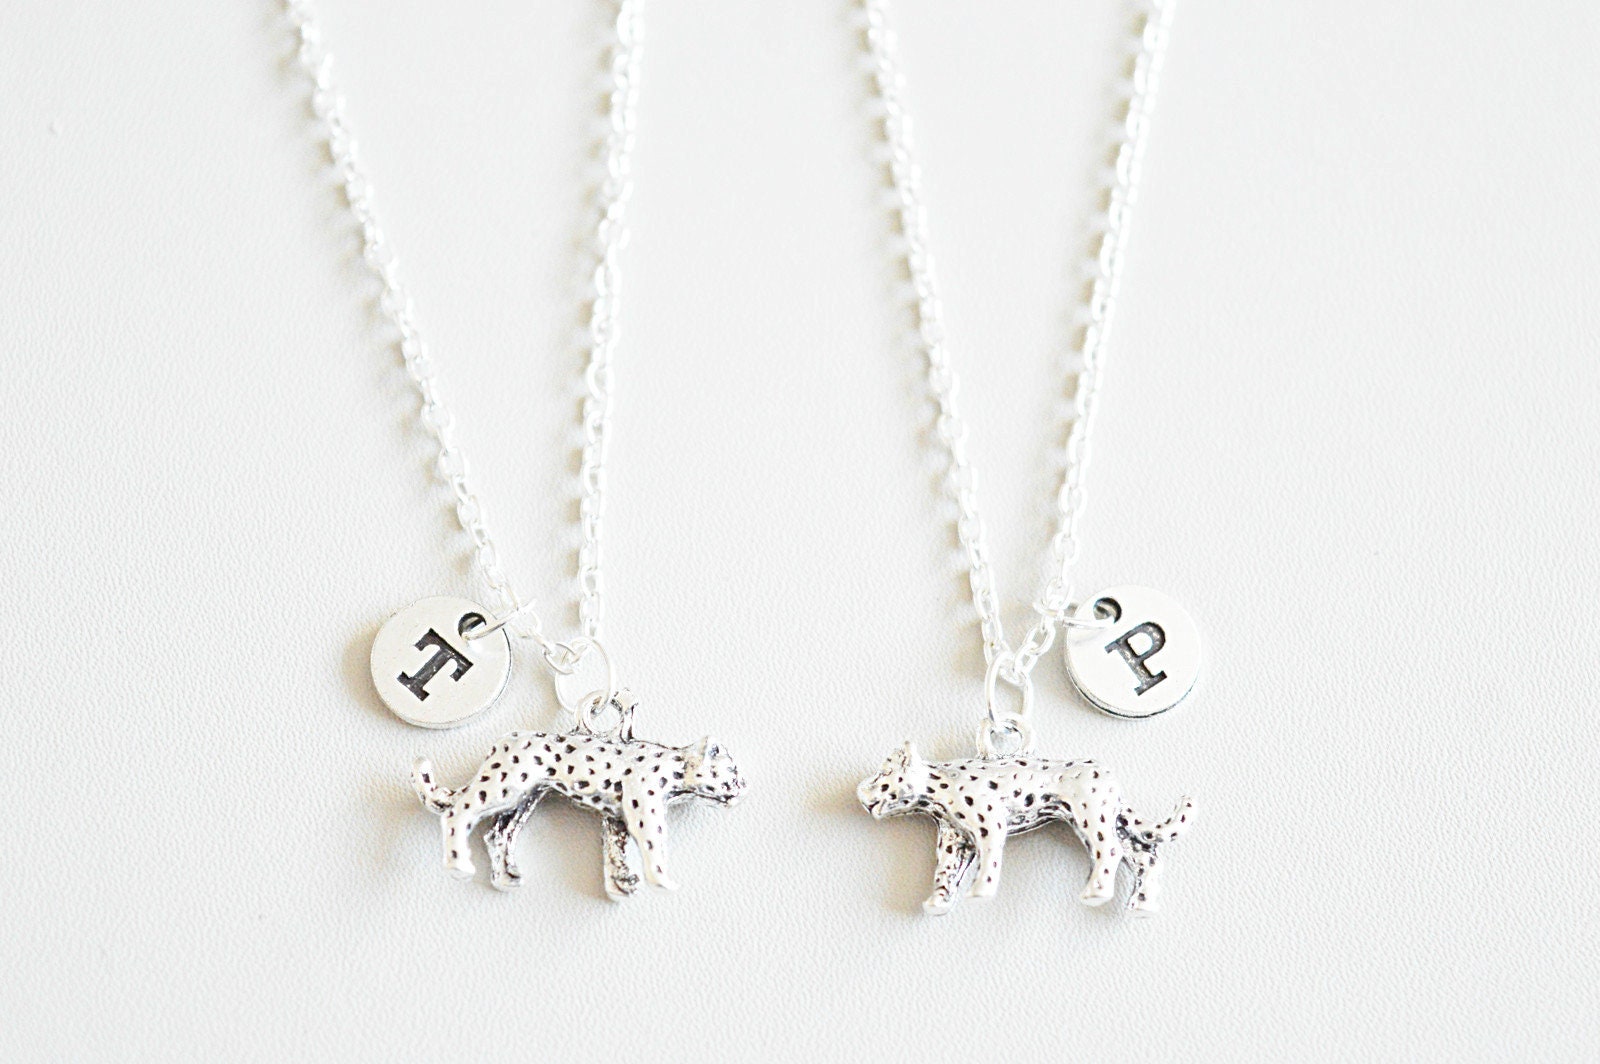 Cheetah necklaces, 2 Best friend necklaces, Friendship necklace, Bff necklace, Friends necklace, Cheetah Gifts,Cheetah Jewellery,Animal Gift